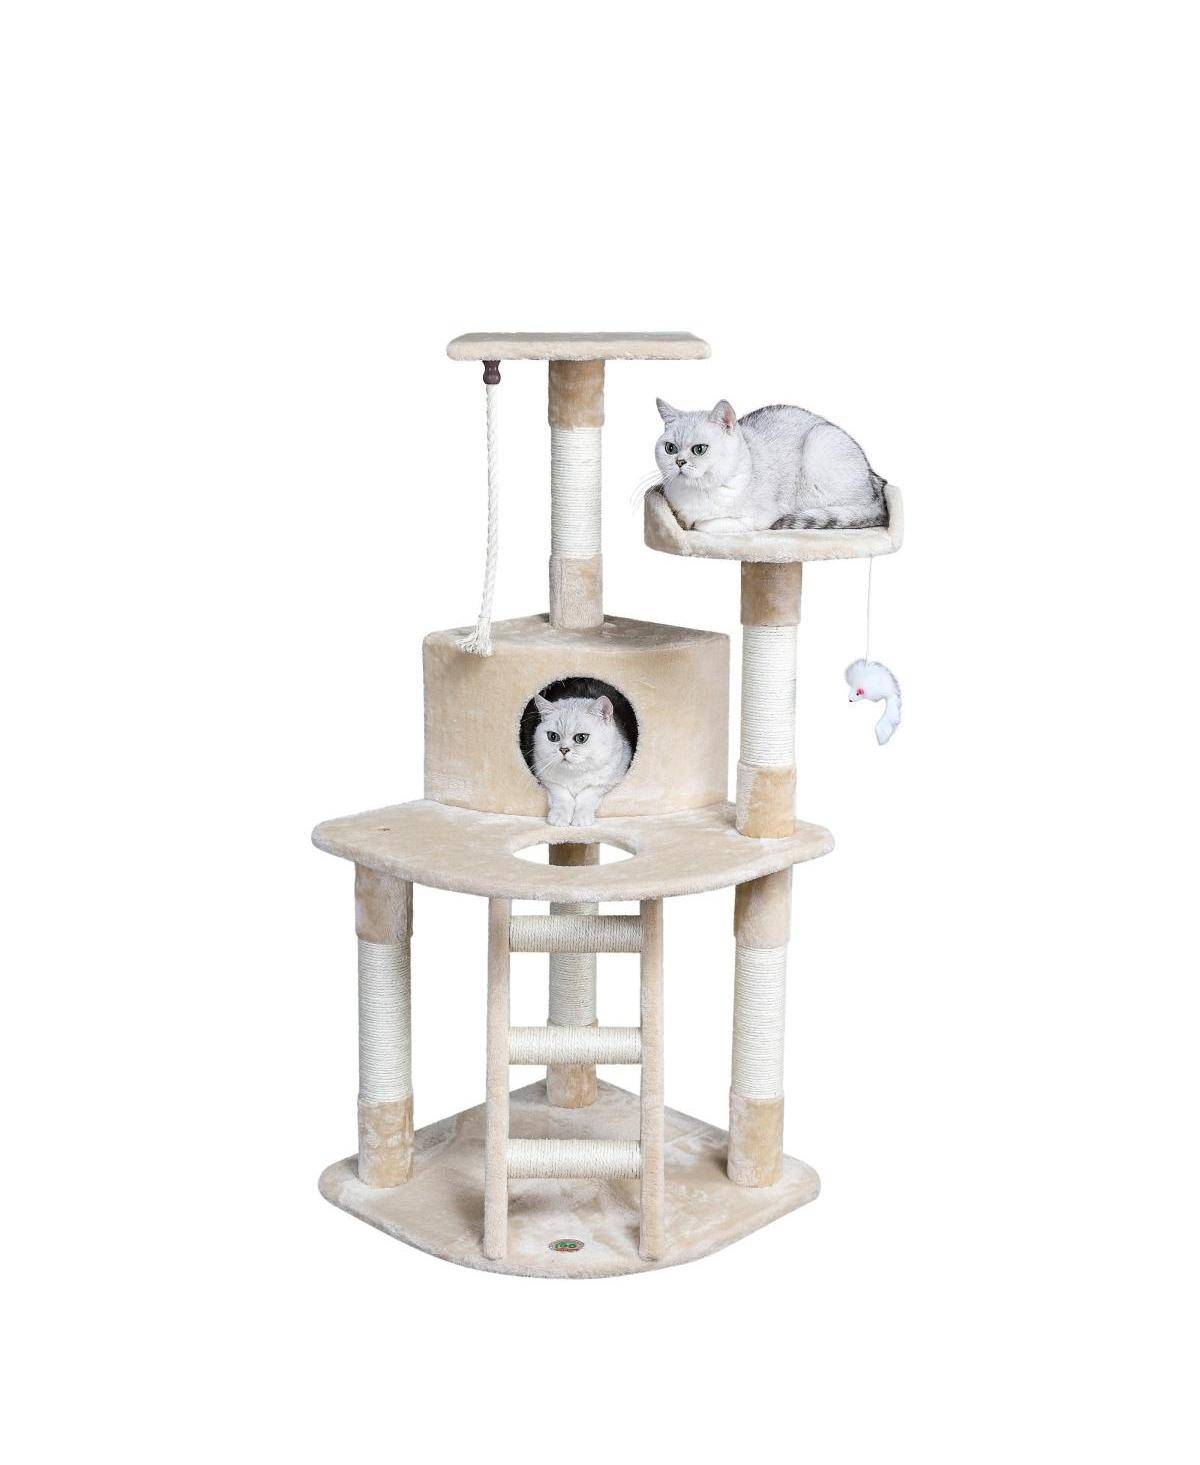 F06 48 in. Classic Cat Tree Condo with Sisal Covered Posts - Open miscellaneous